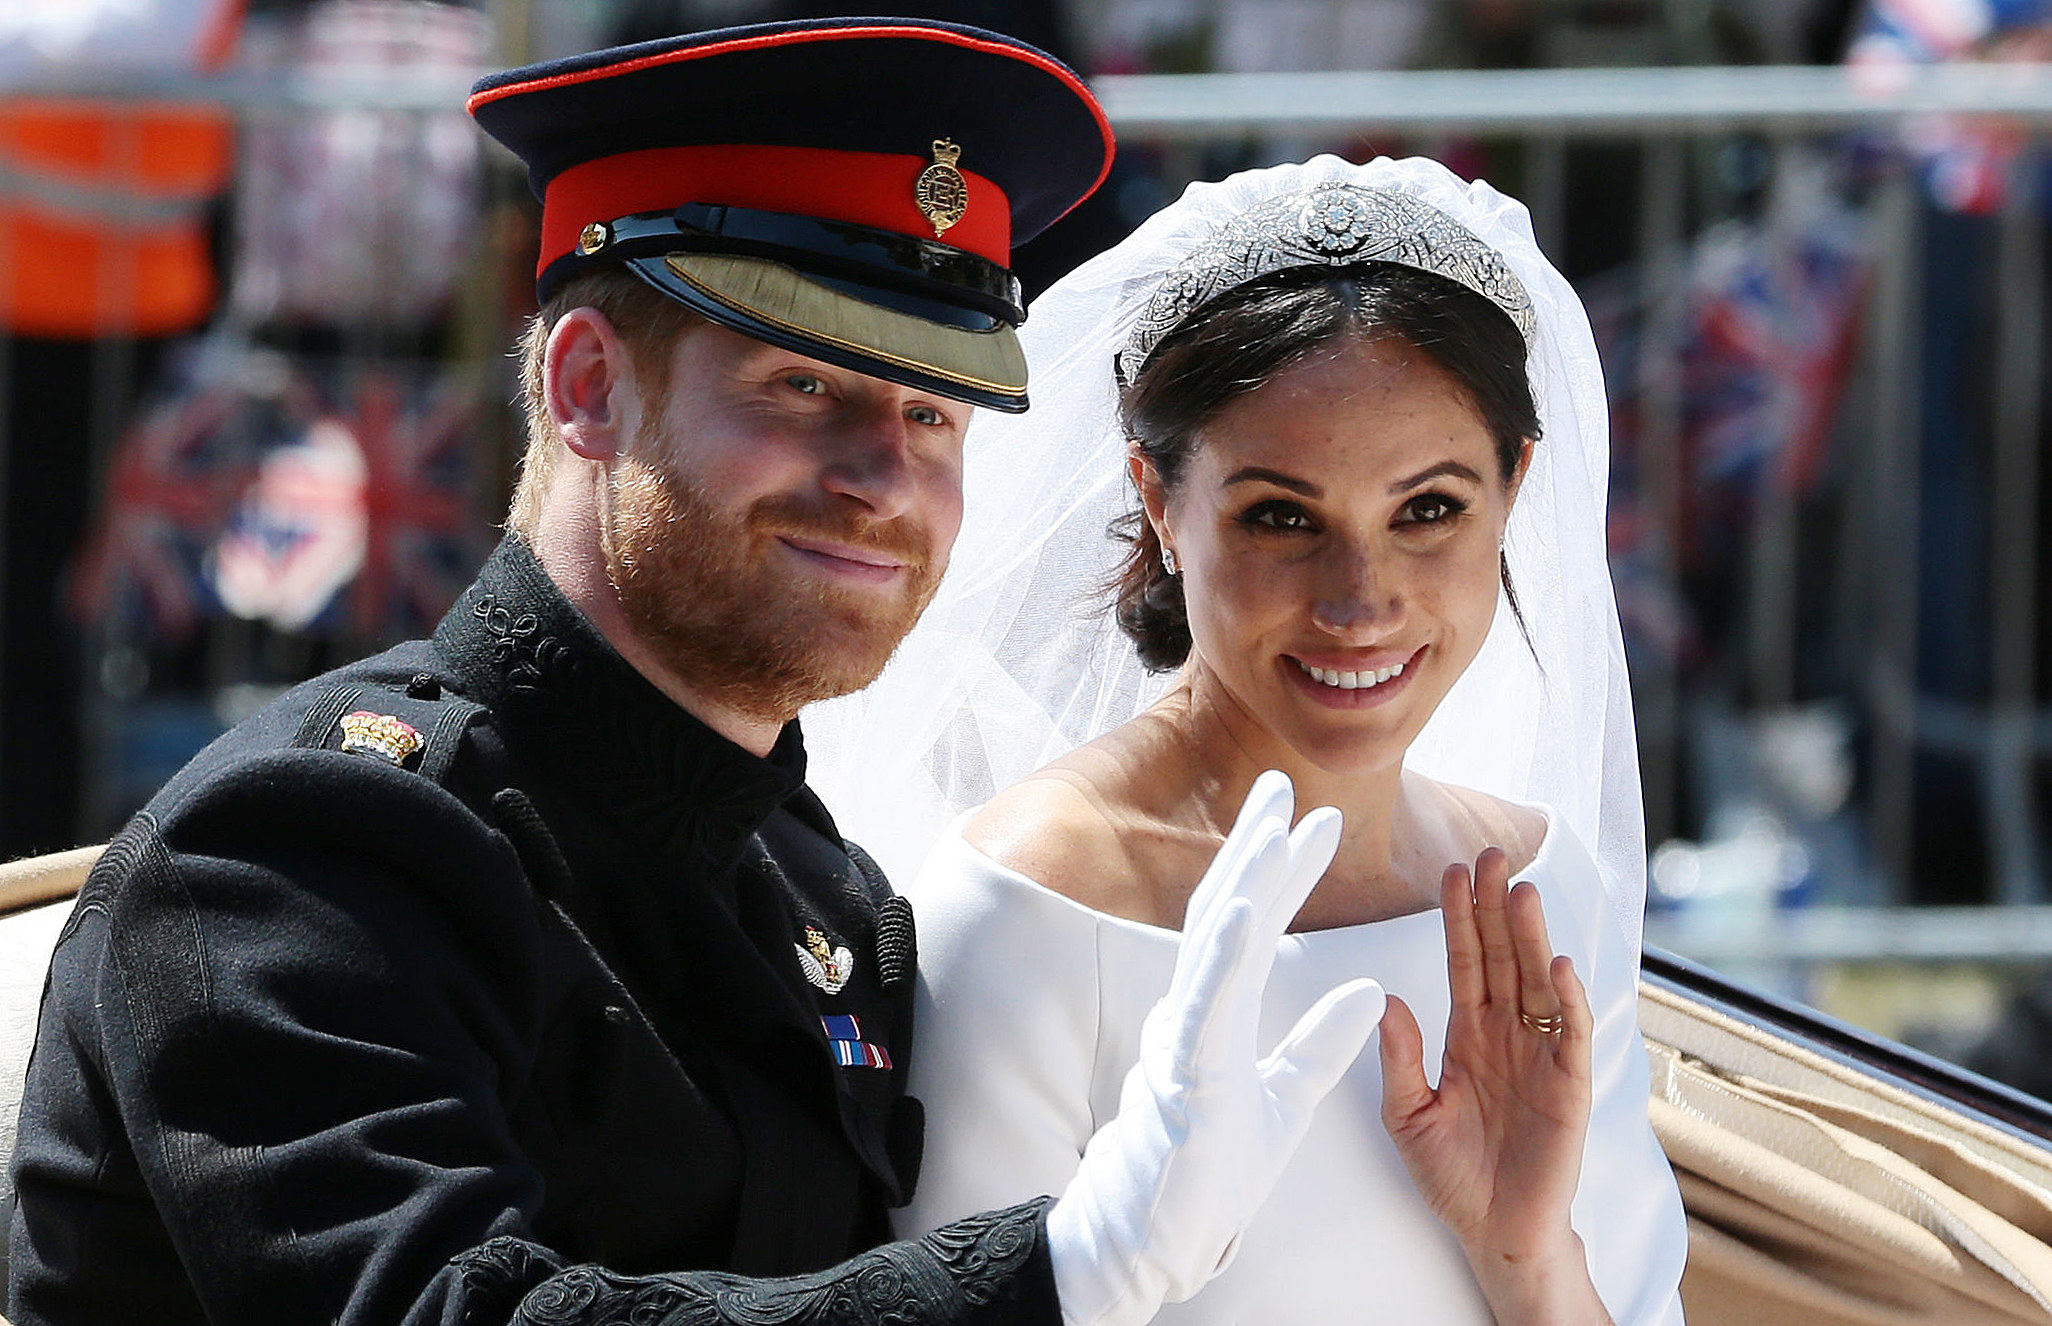 Prince Harry and Meghan waving to the crowd as they ride in a carriage after their wedding